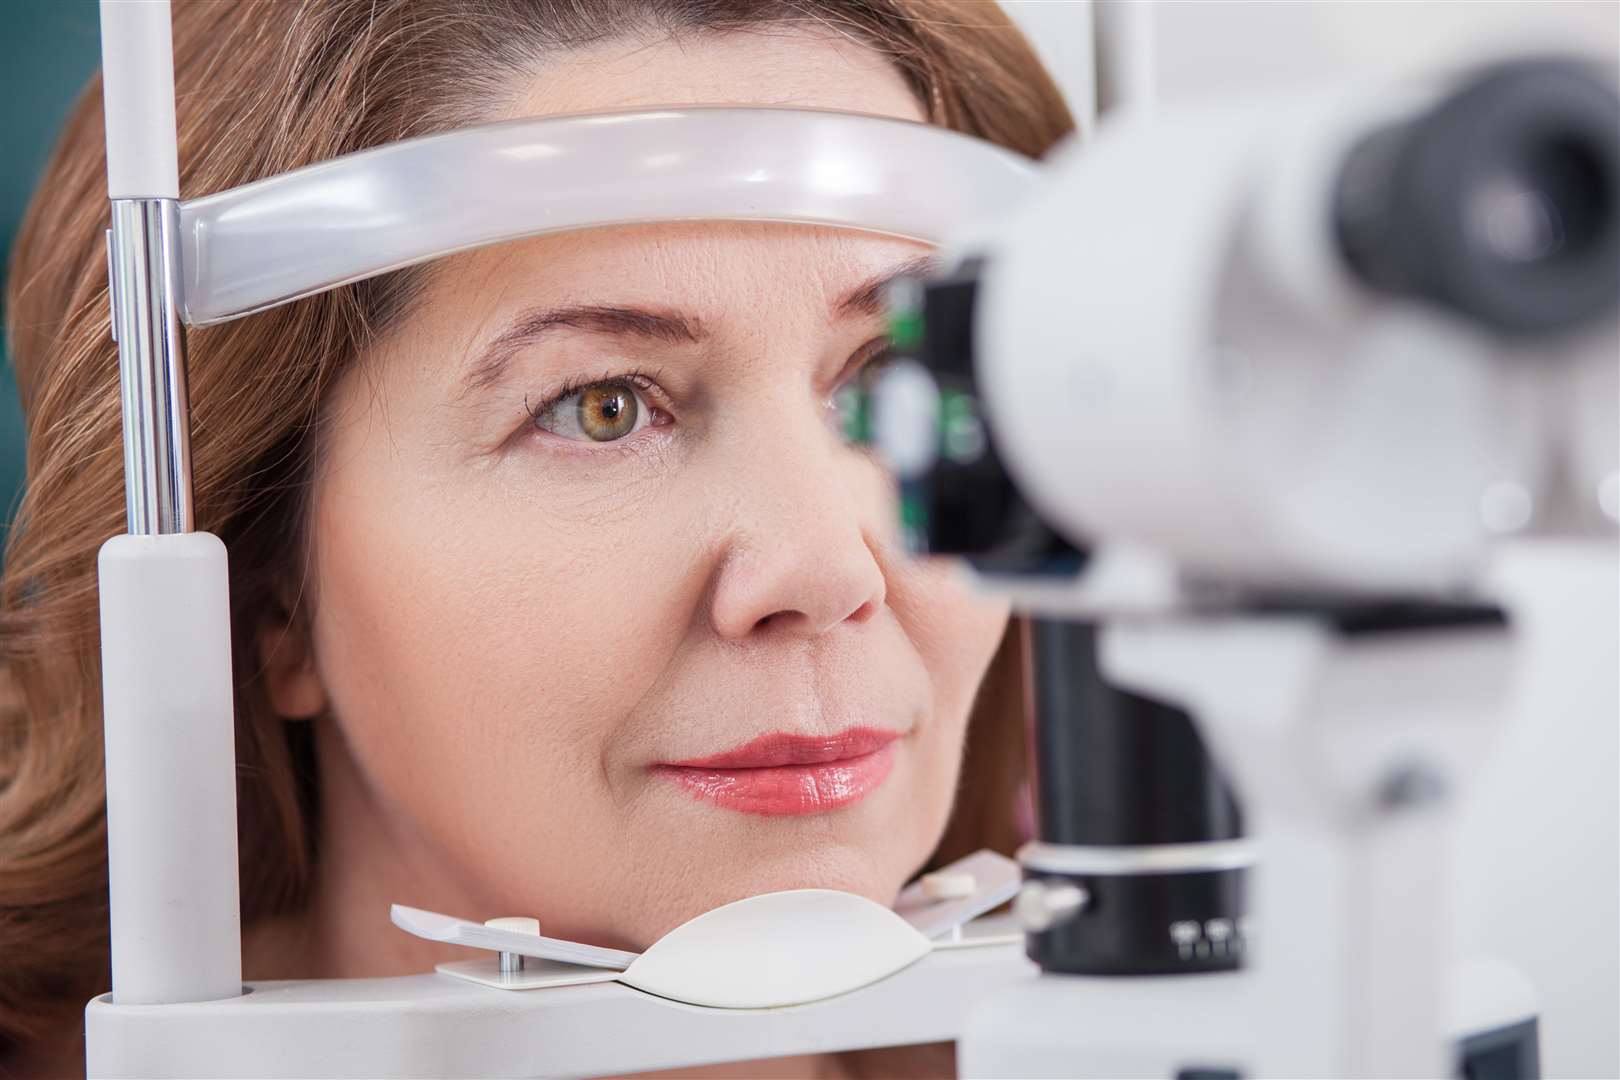 Specsavers and Glaucoma UK are emphasising the importance of regular eye tests.